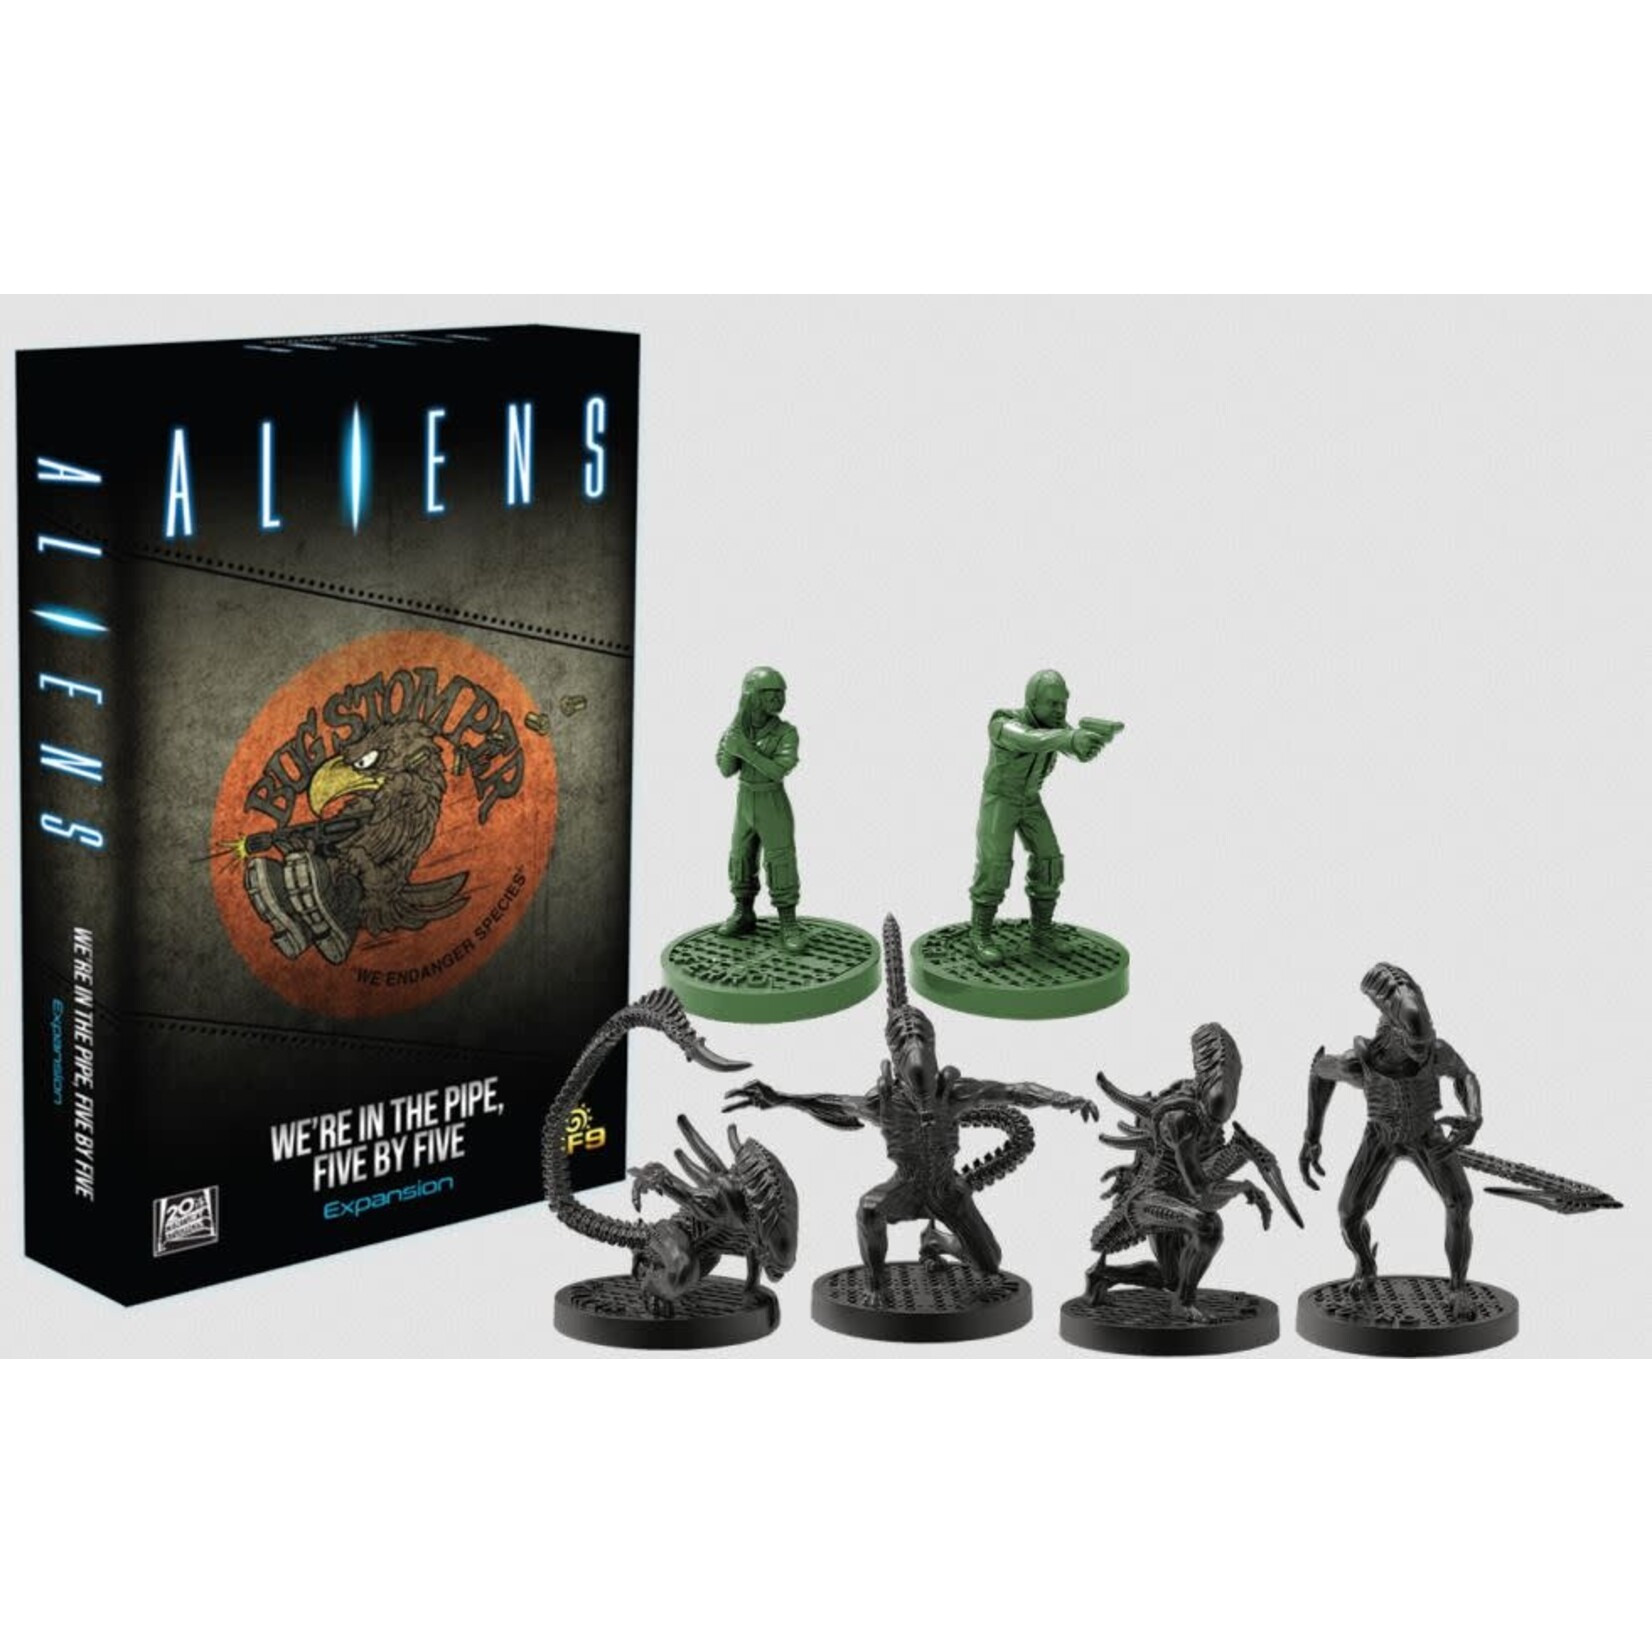 Aliens: We're in the Pipe, Five By Five Expansion